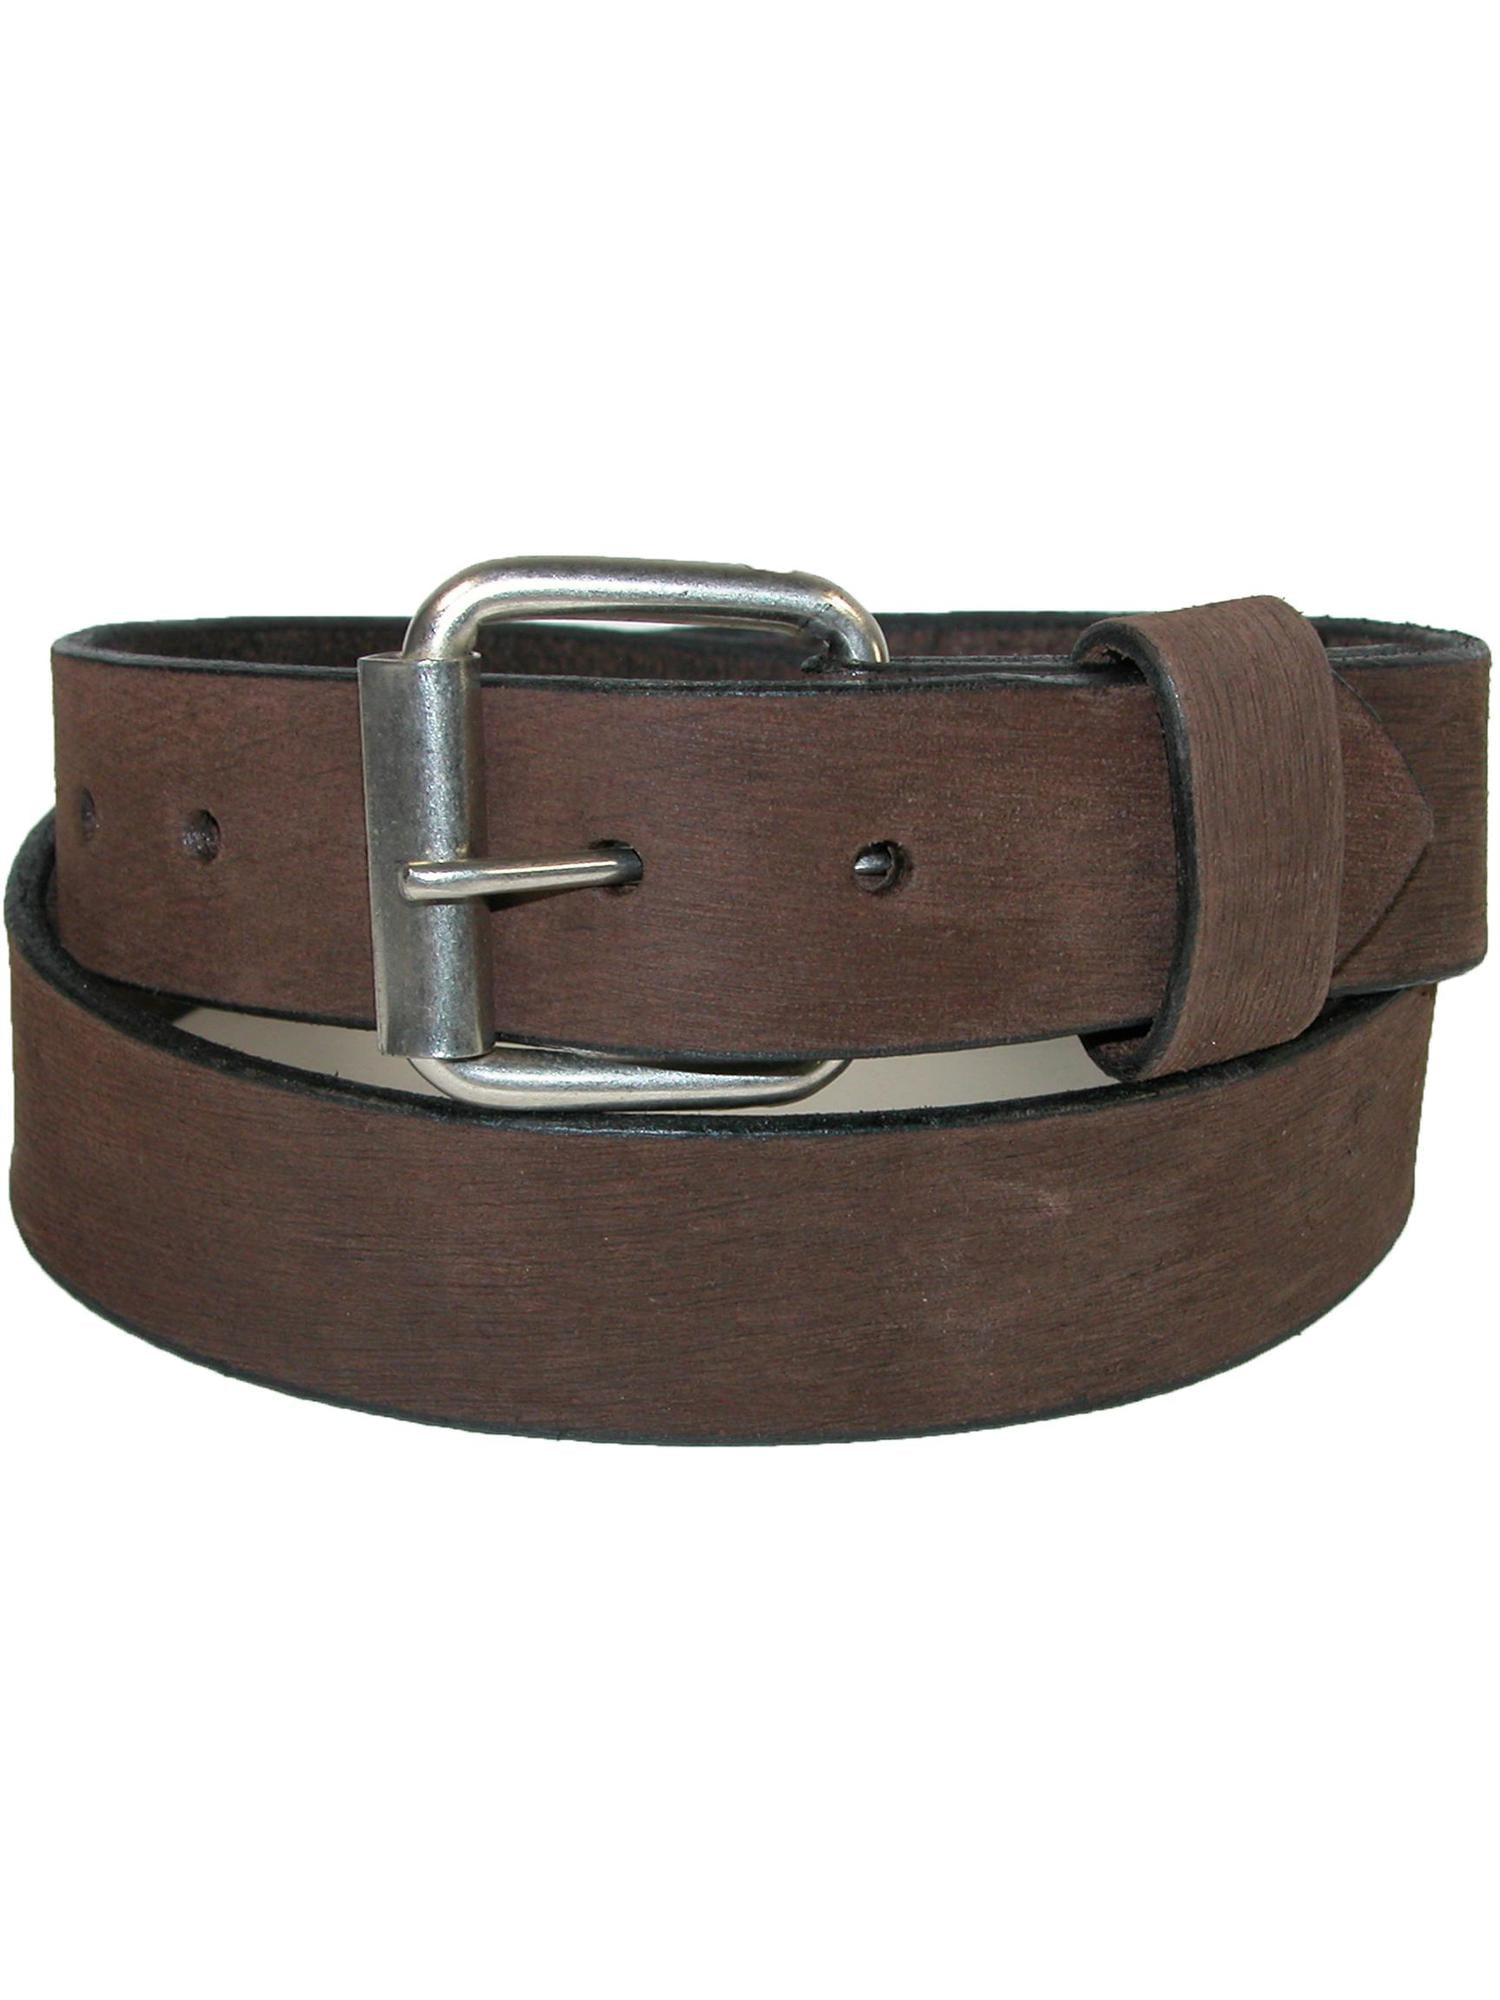 Checkered, Real Leather Brown Belt 1.5 inch/38mm, Sizes - S, M, L, XL  (Interchangeable Buckle)